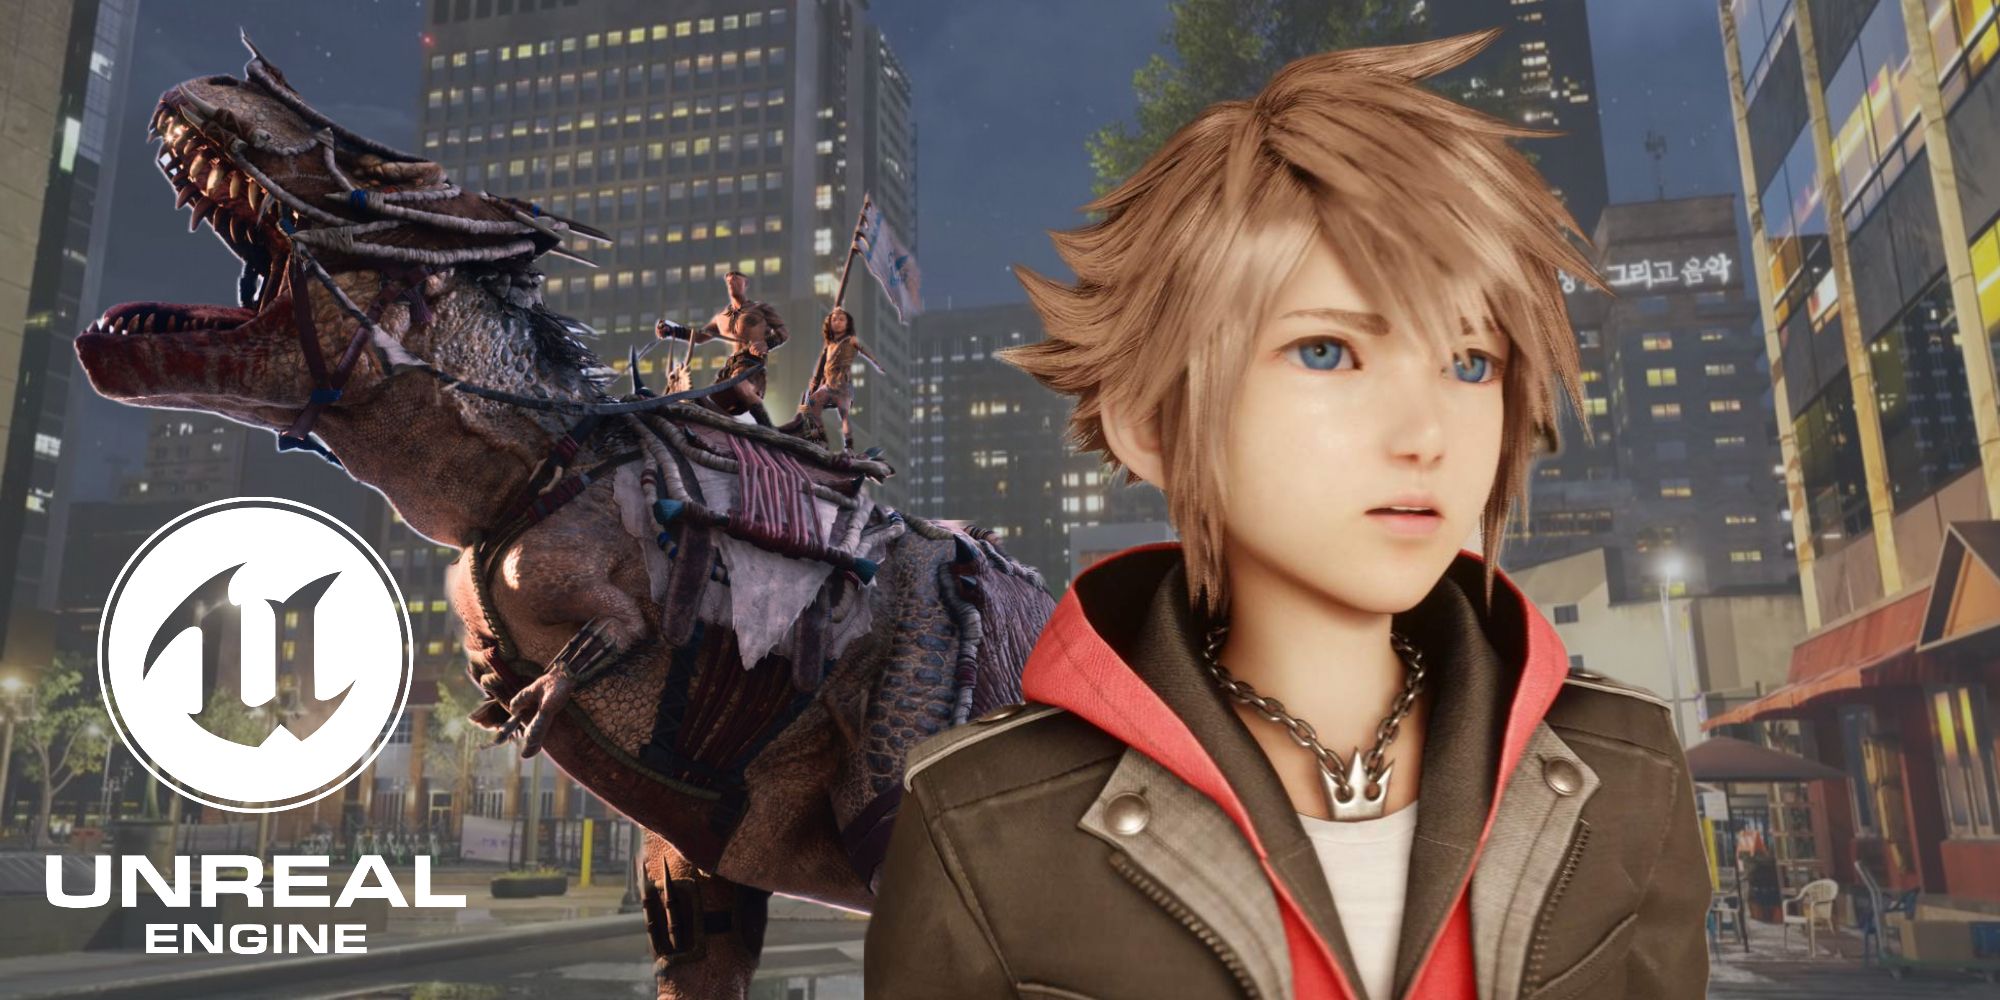 Screenshots generated in unreal engine 5 are shown. Sora from Kingdom Hearts is on the right. A t-rex from ARK 2 is displayed on the left, as well as the Unreal Engine logo. 